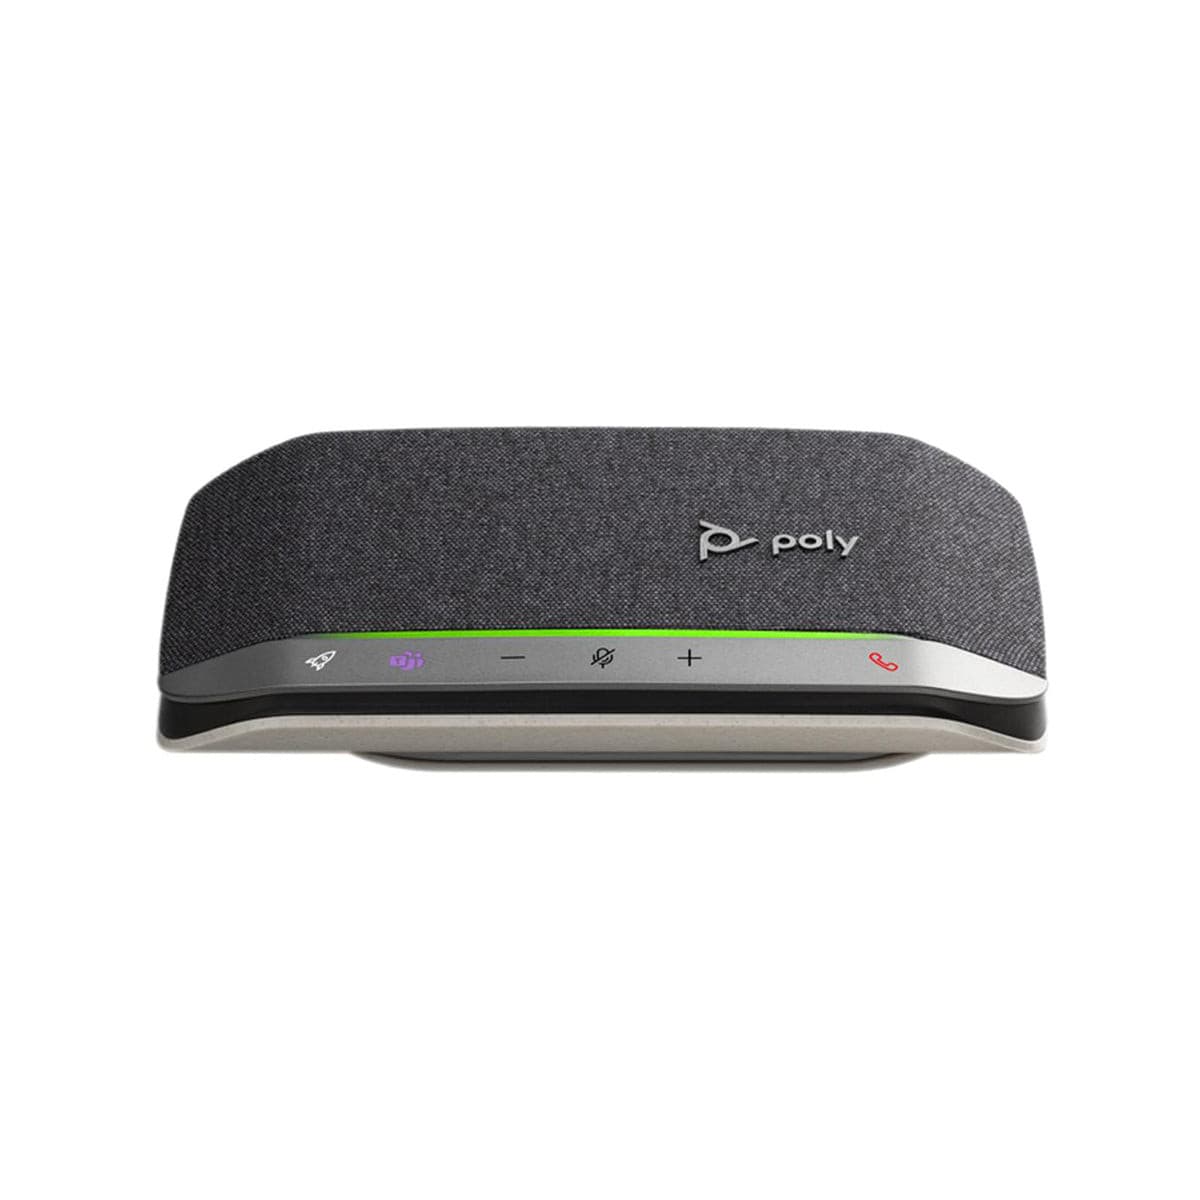 Poly Sync 20+ USB Smart Speakerphone for Home/Office.